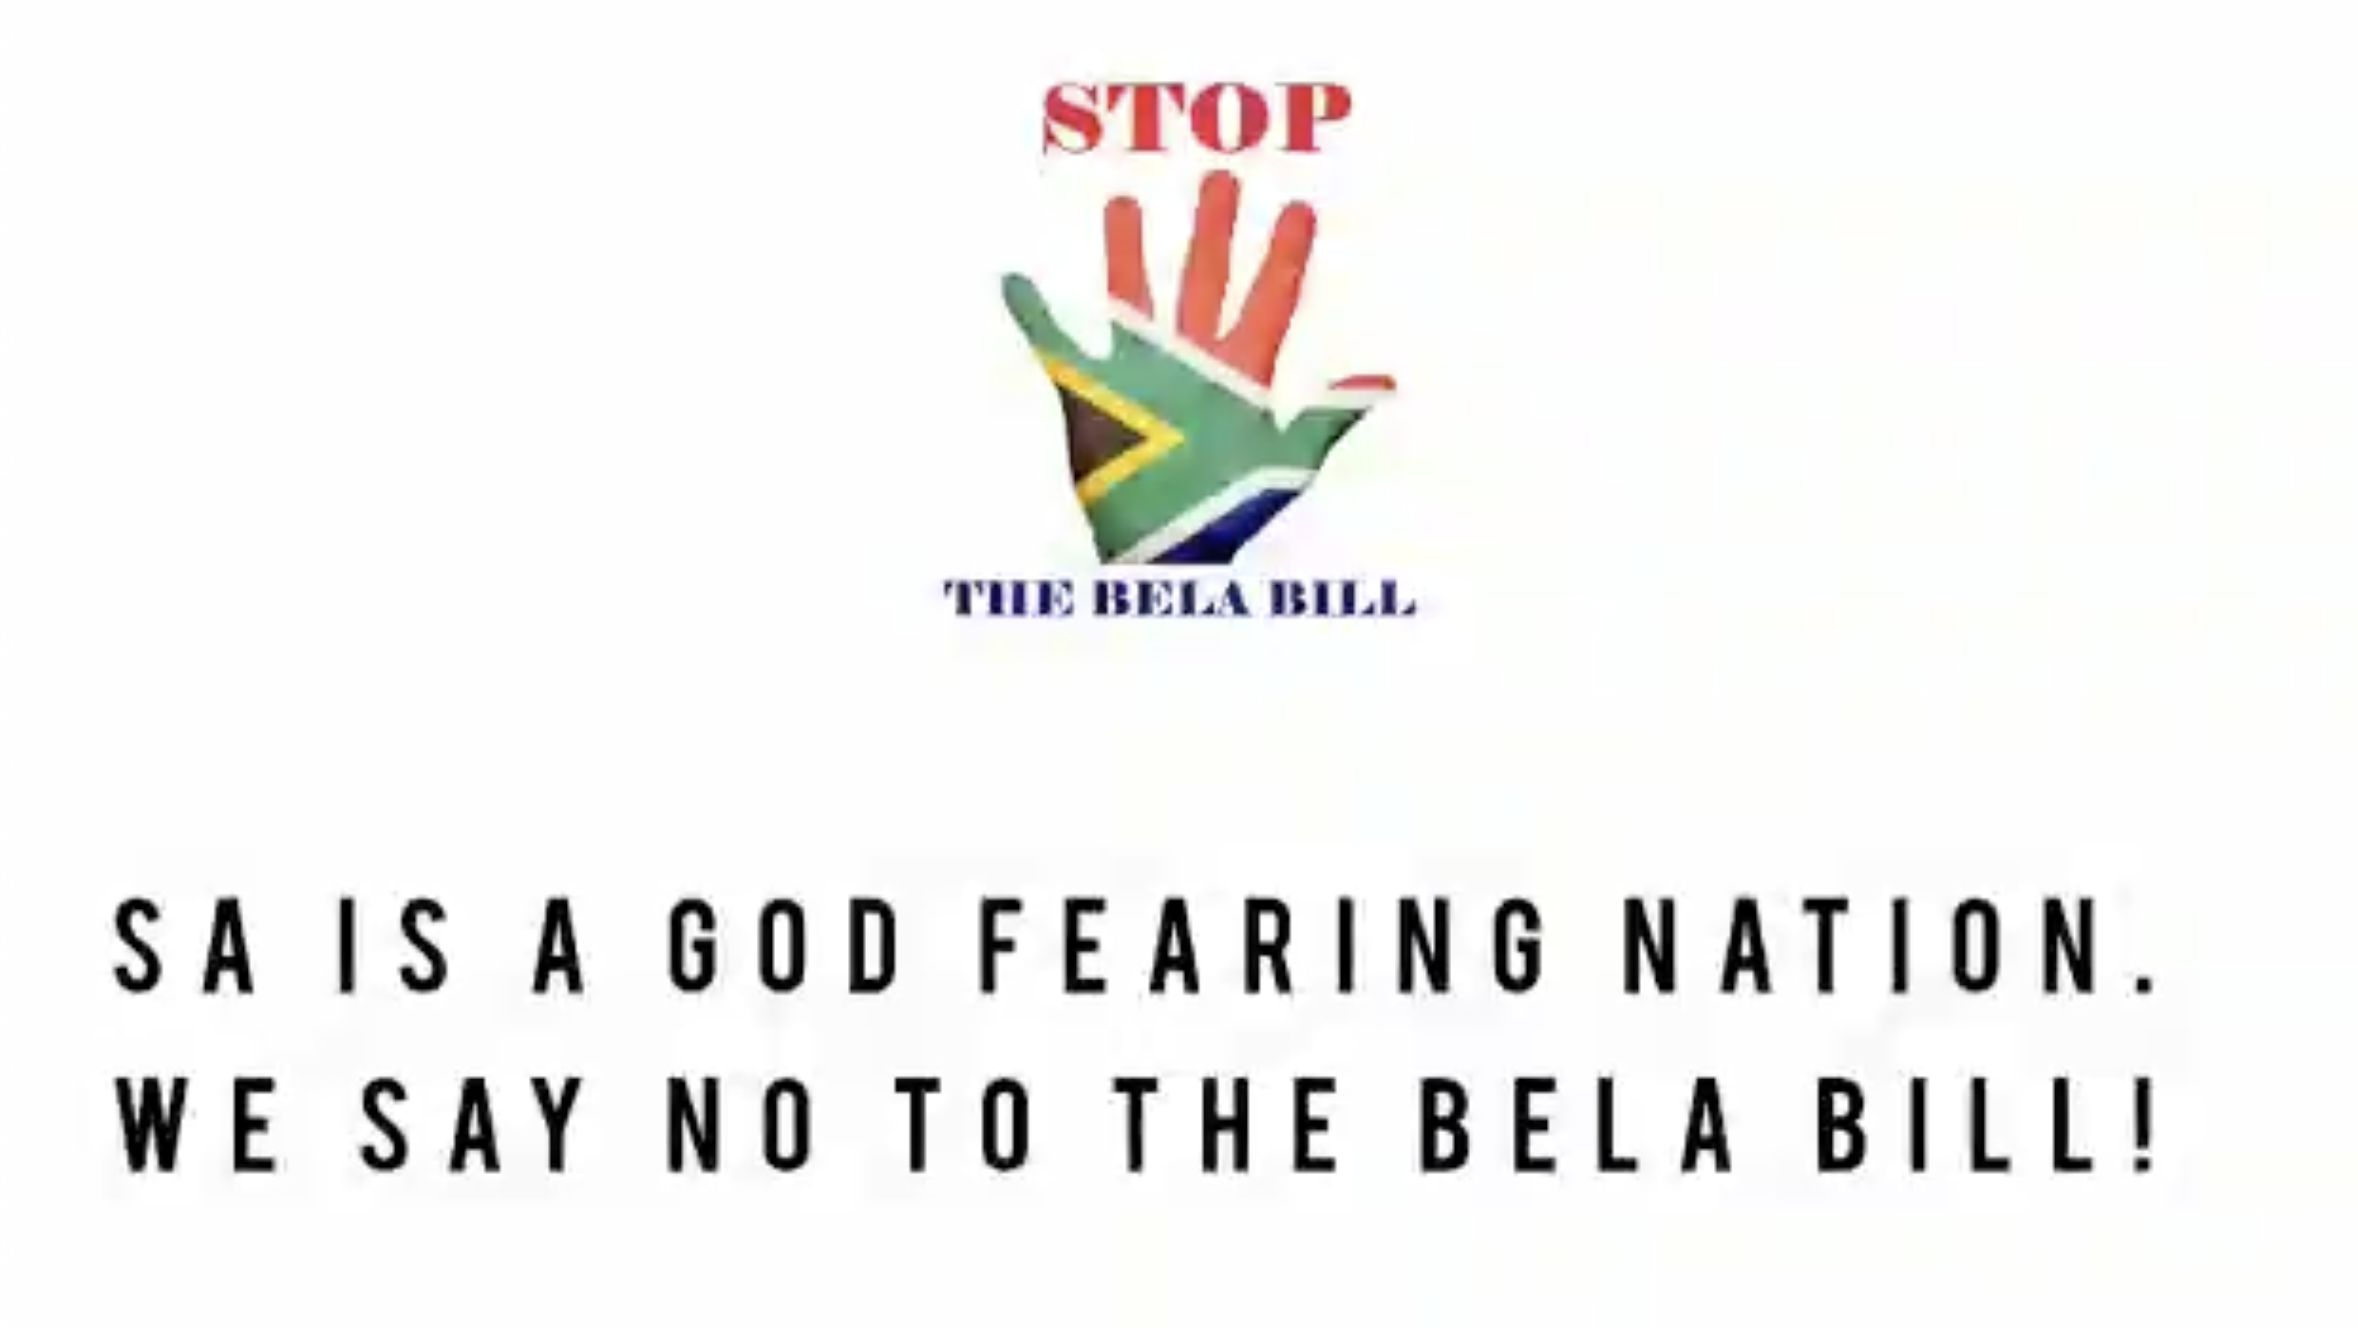 We say NO to the BELA Bill!